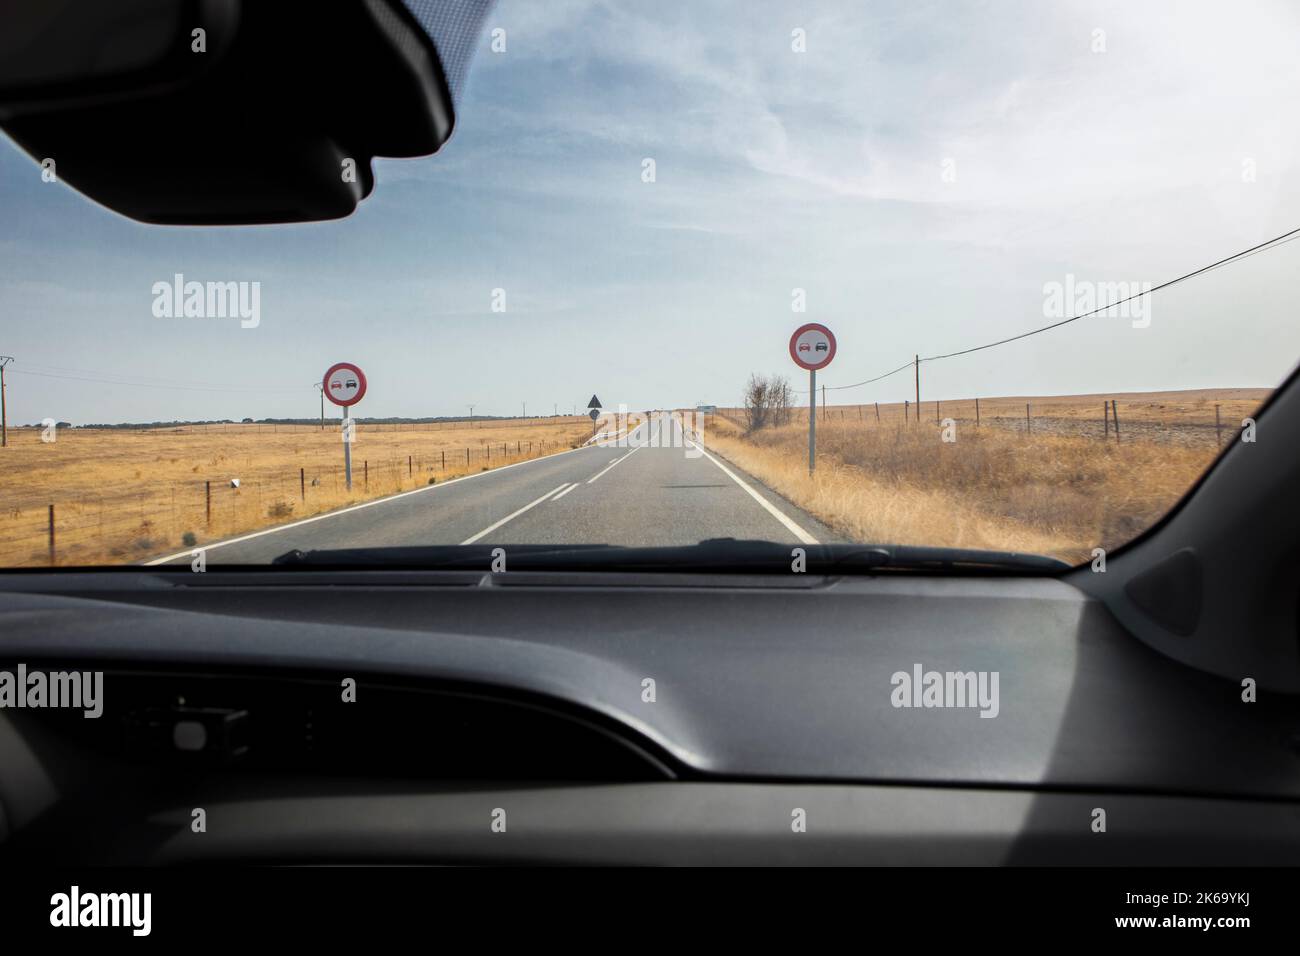 Banned overtakes signals and  continuous line. View from the inside of the car Stock Photo